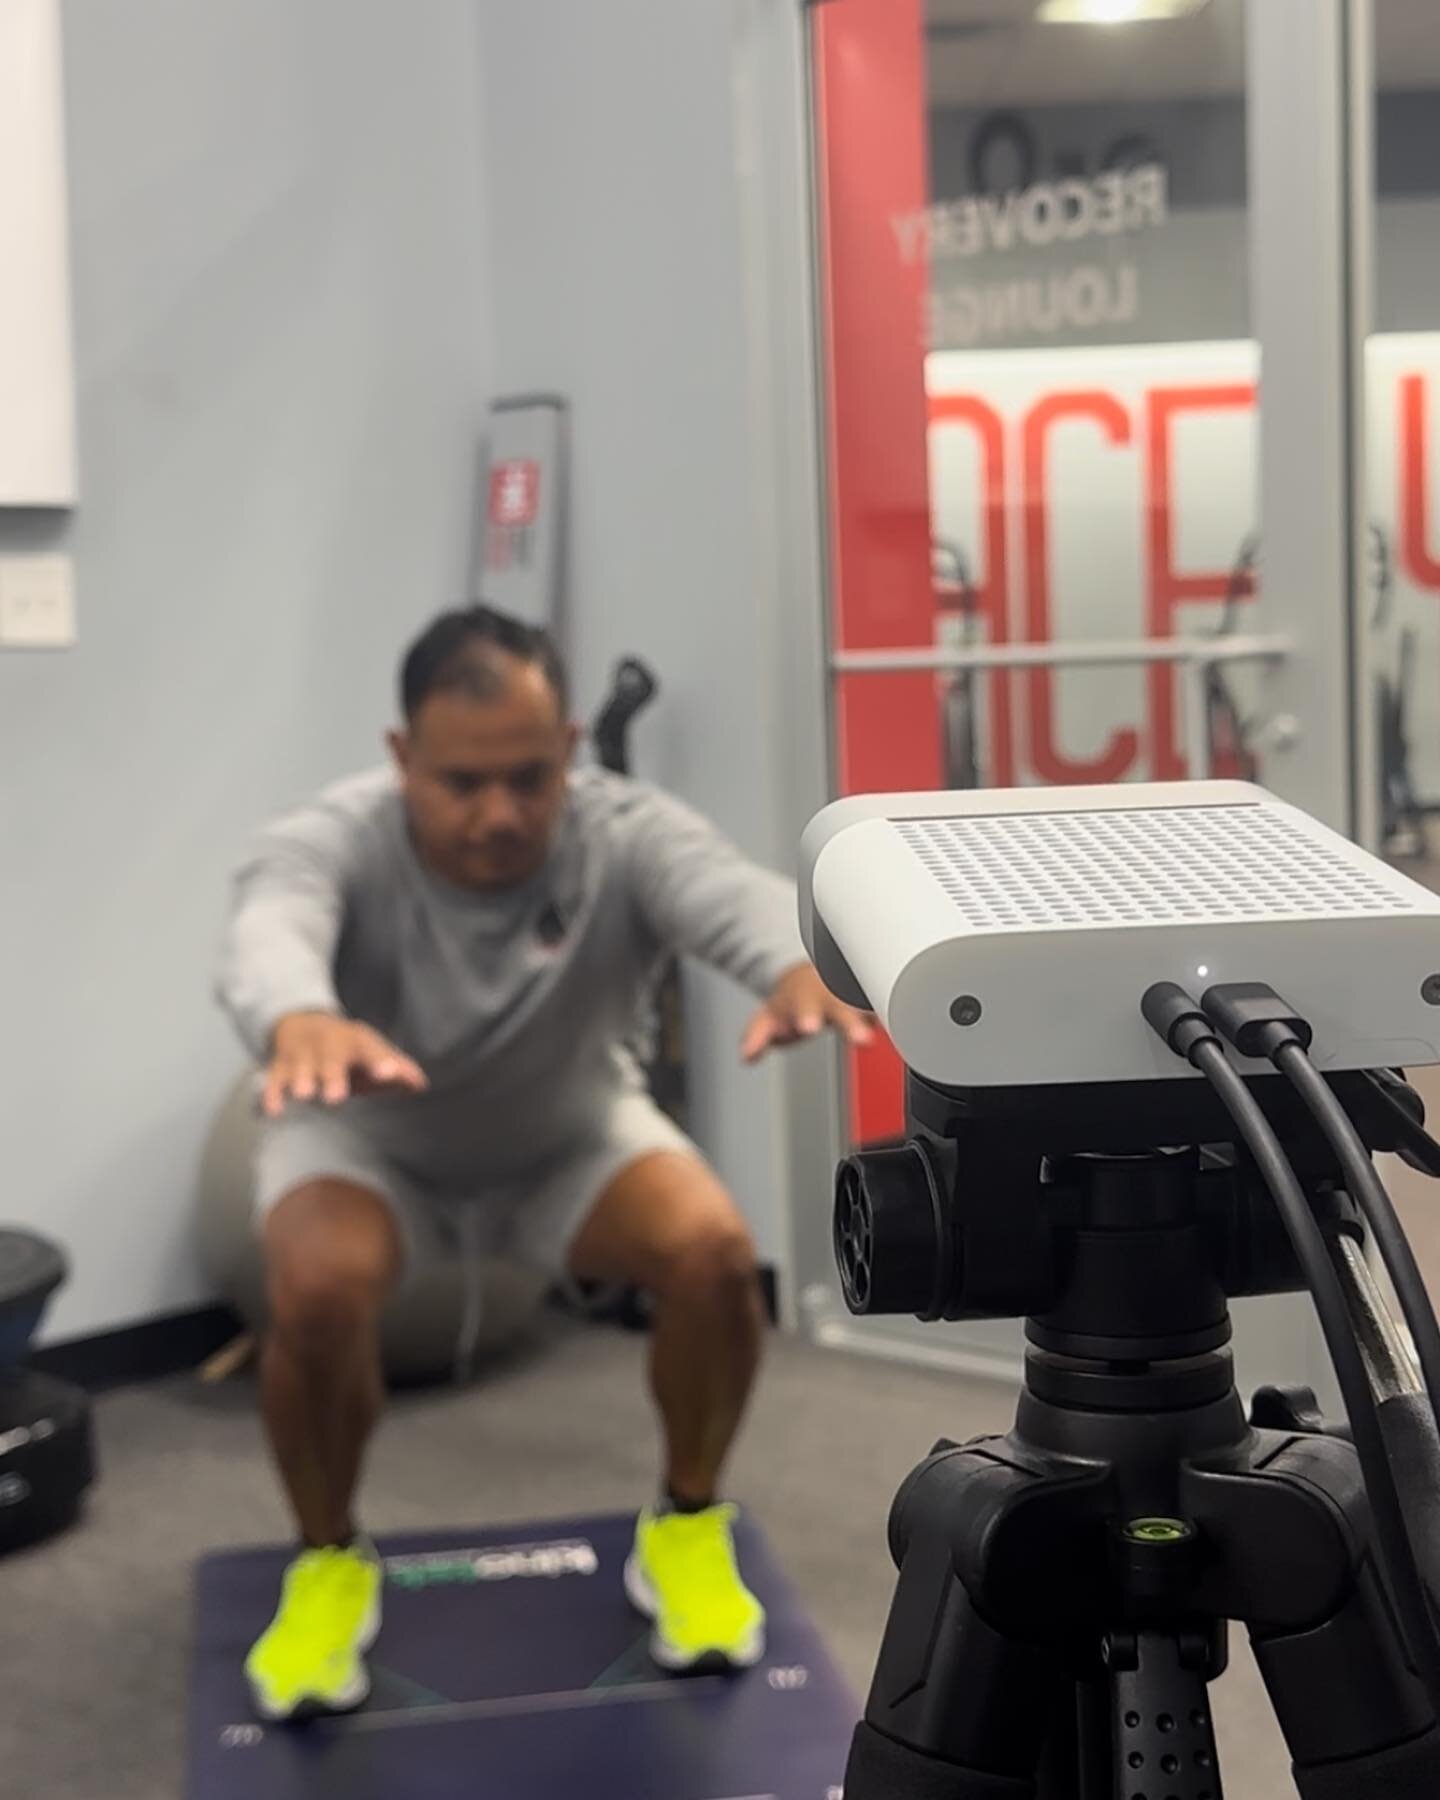 3d motion capture allows us to collect real time range of motion assessments during functional movements like a squat. This data helps us identify movement deficiencies in our clients and athletes which will help us create individualized programs to 